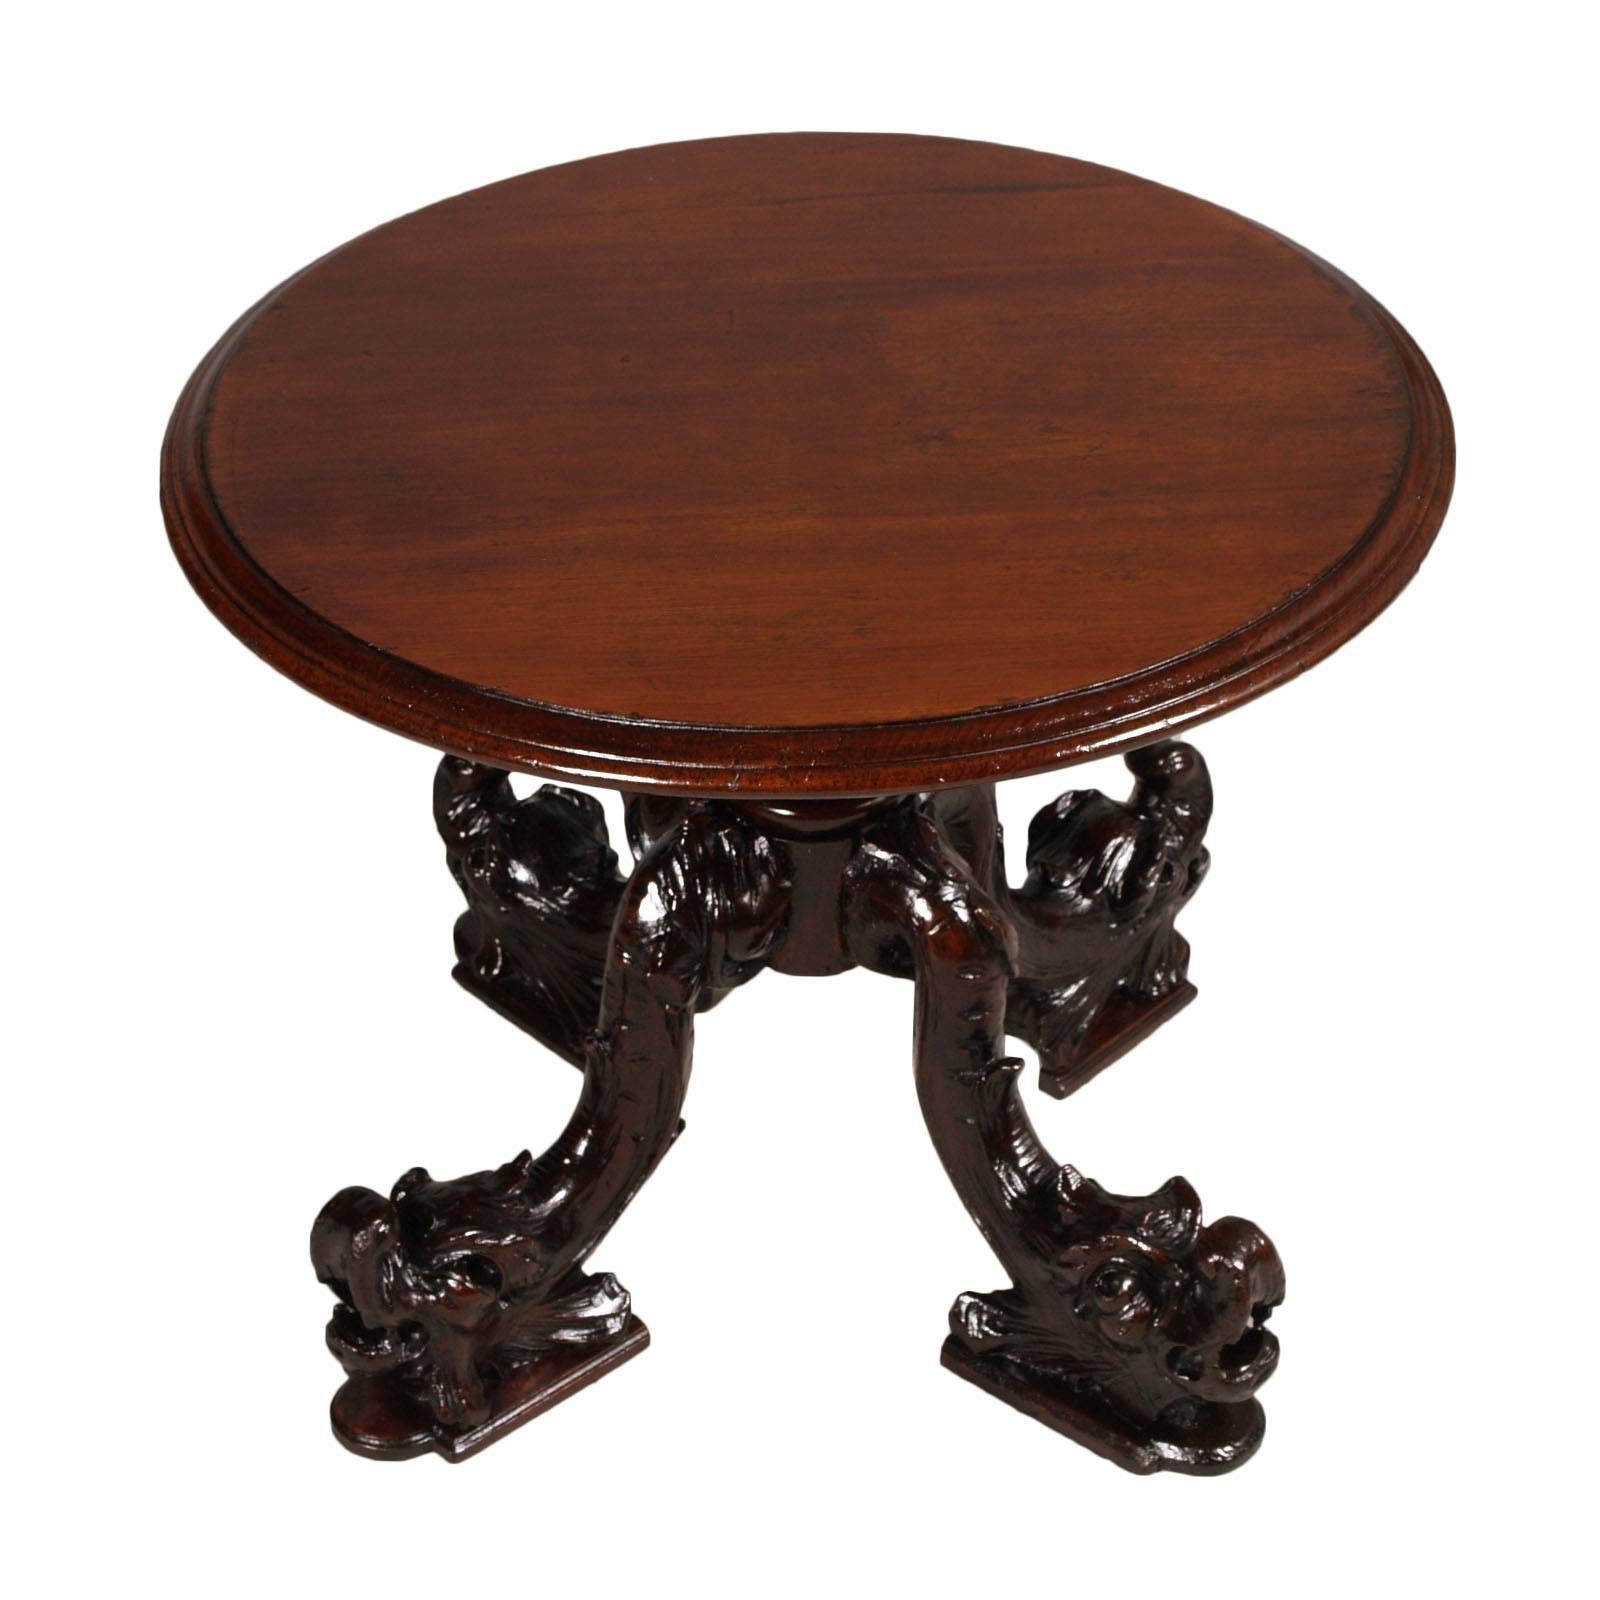 Mid-19th century hand-carved oakwood Gothic revivalist coffee table Eugène Emmanuel Viollet-le-Duc style. Top in blond applied oakwood slab. 
Table from ancient Palladian mansion, Vicenza

Measures cm: H 50, diameter 62

About
Eugène Emmanuel